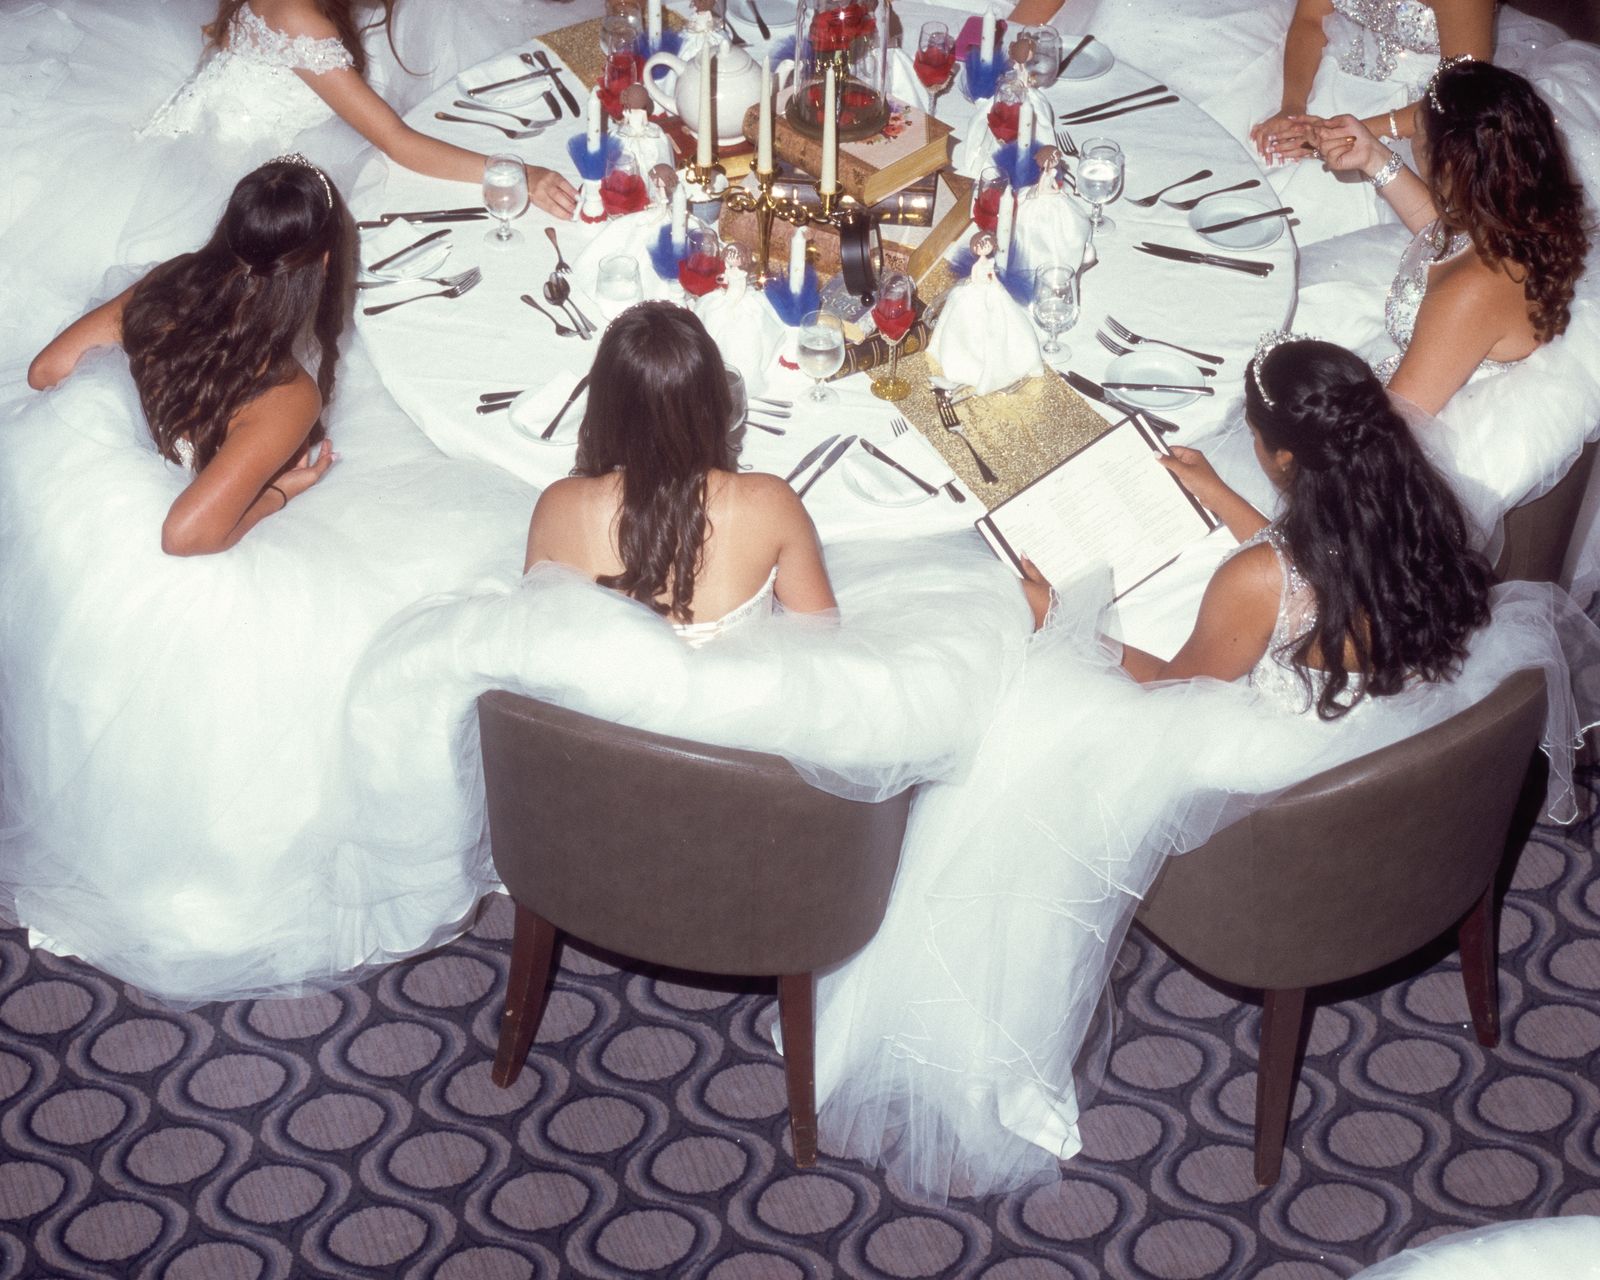 © Samantha Cabrera Friend - Group of quinceañeras sit together at main dining hall on board.